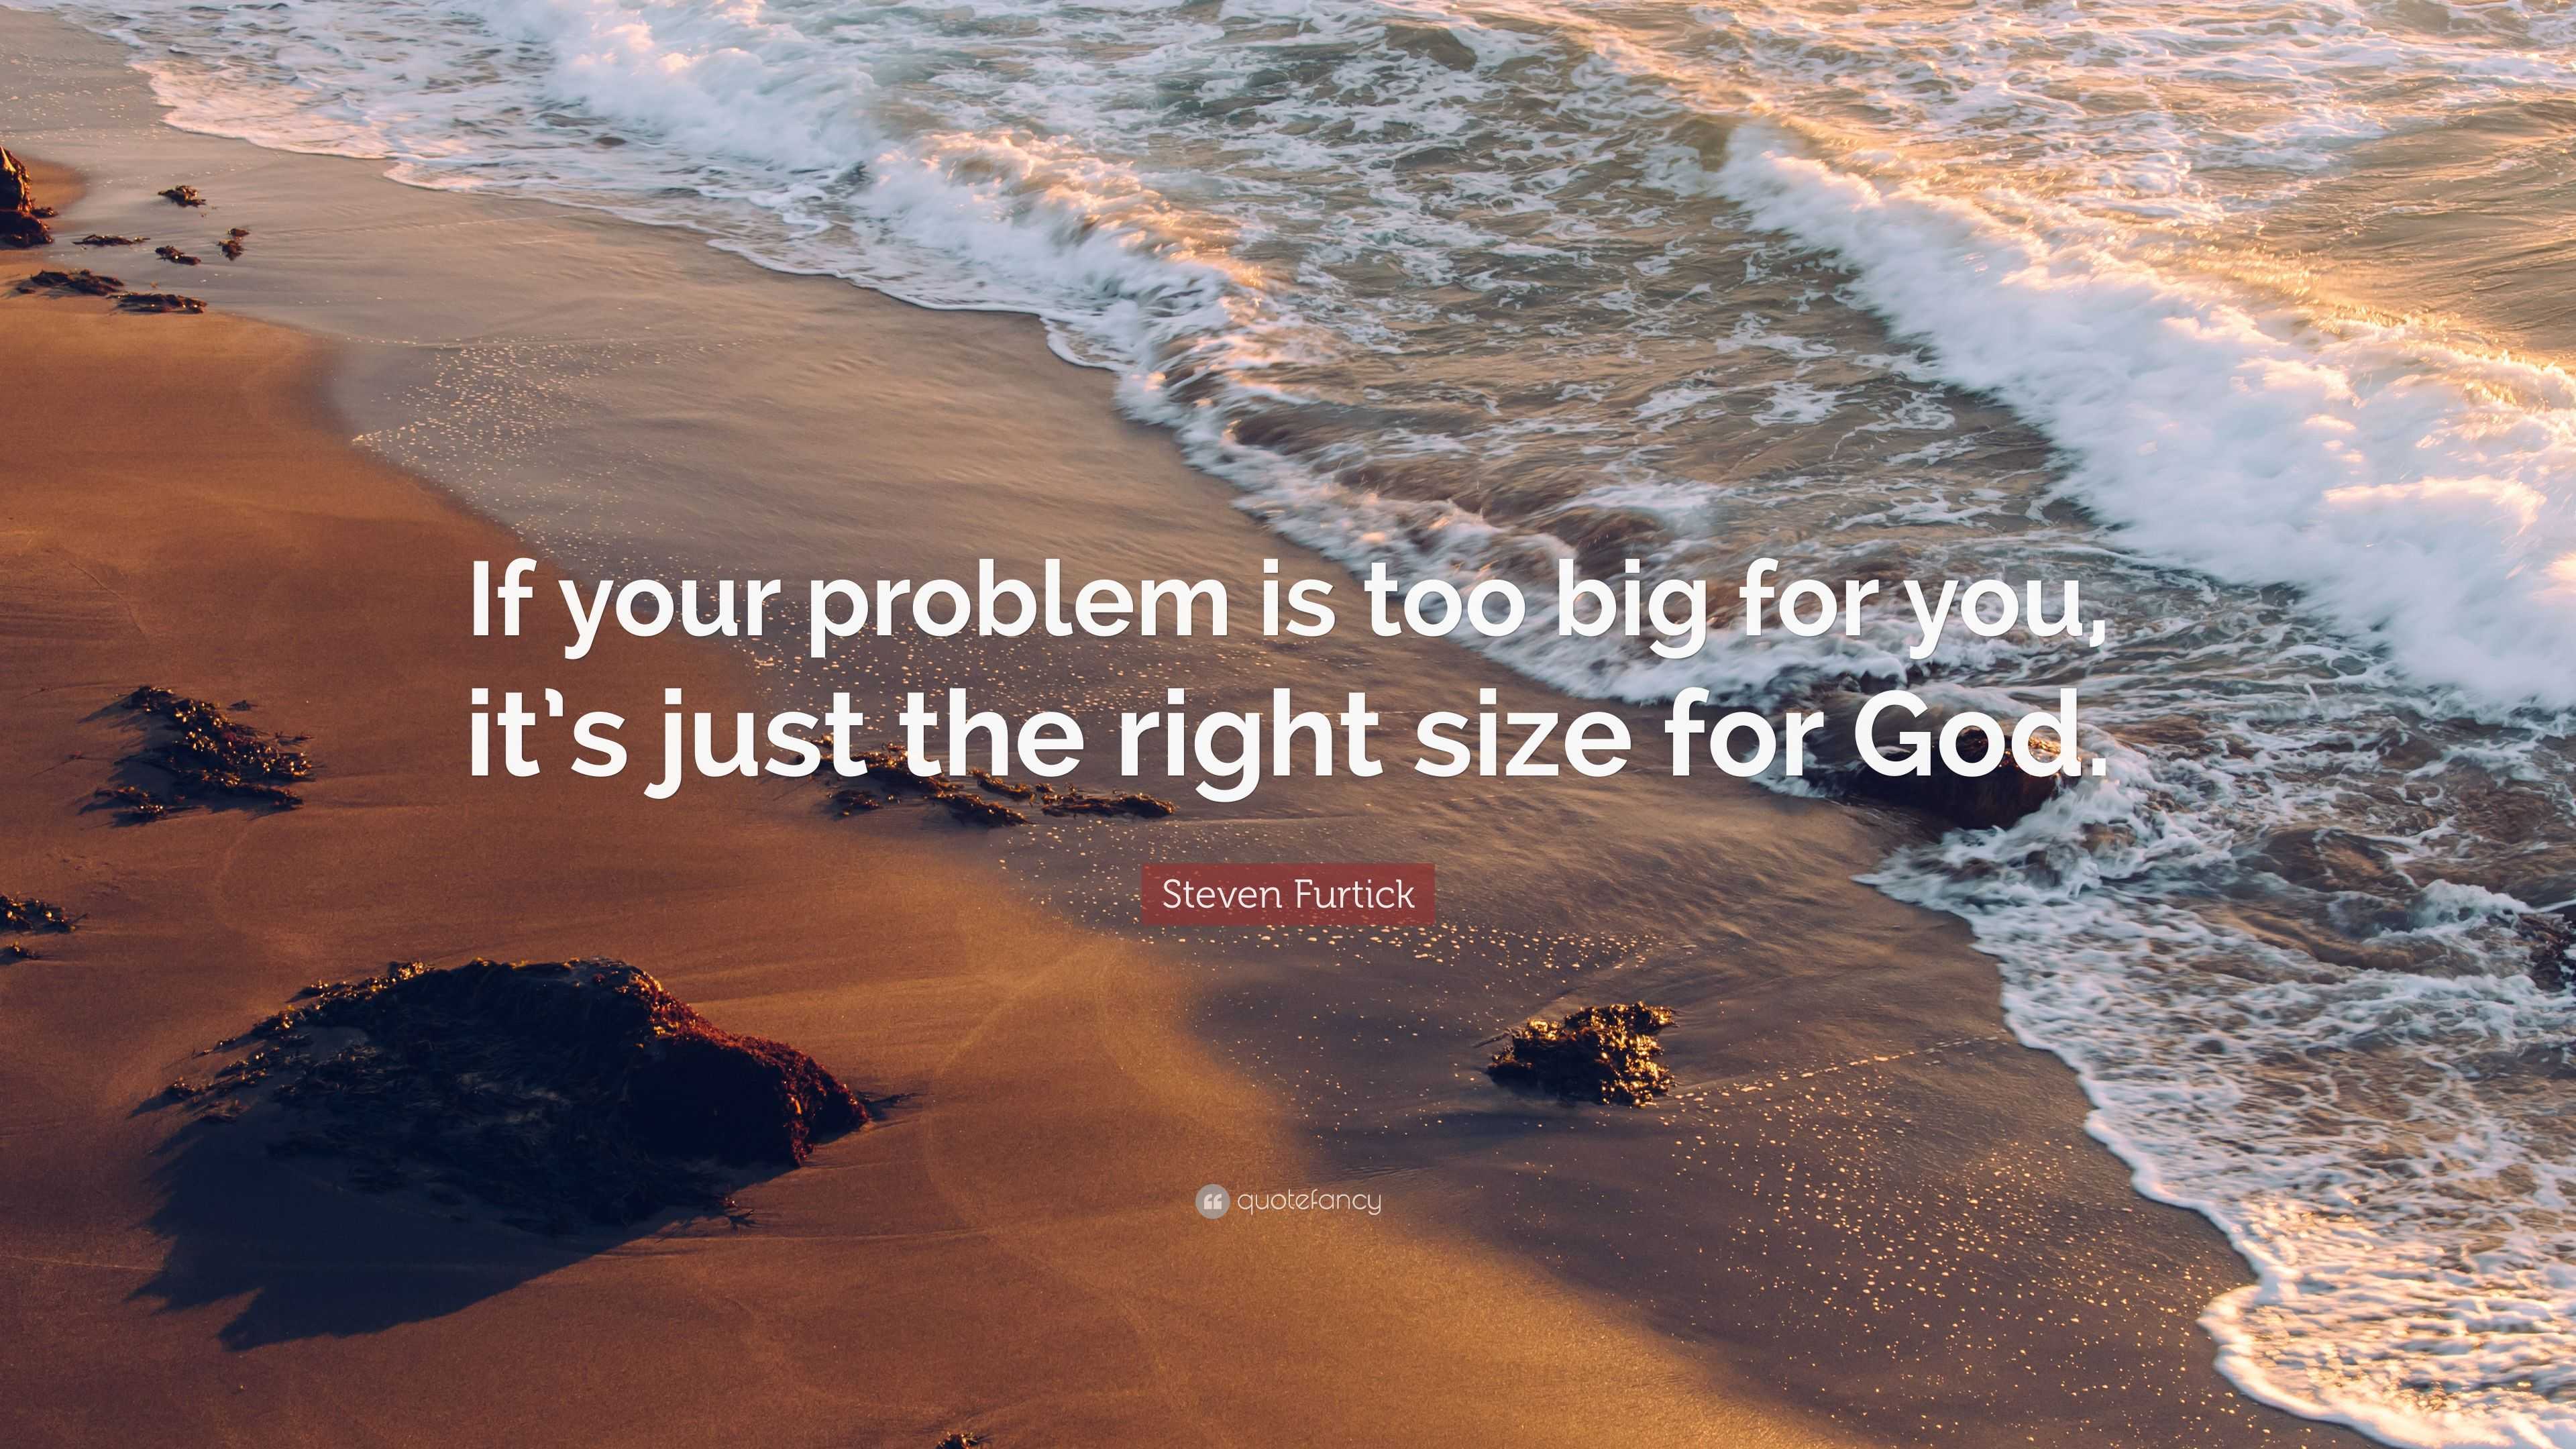 Steven Furtick Quote: “If your problem is too big for you, it's just the  right size